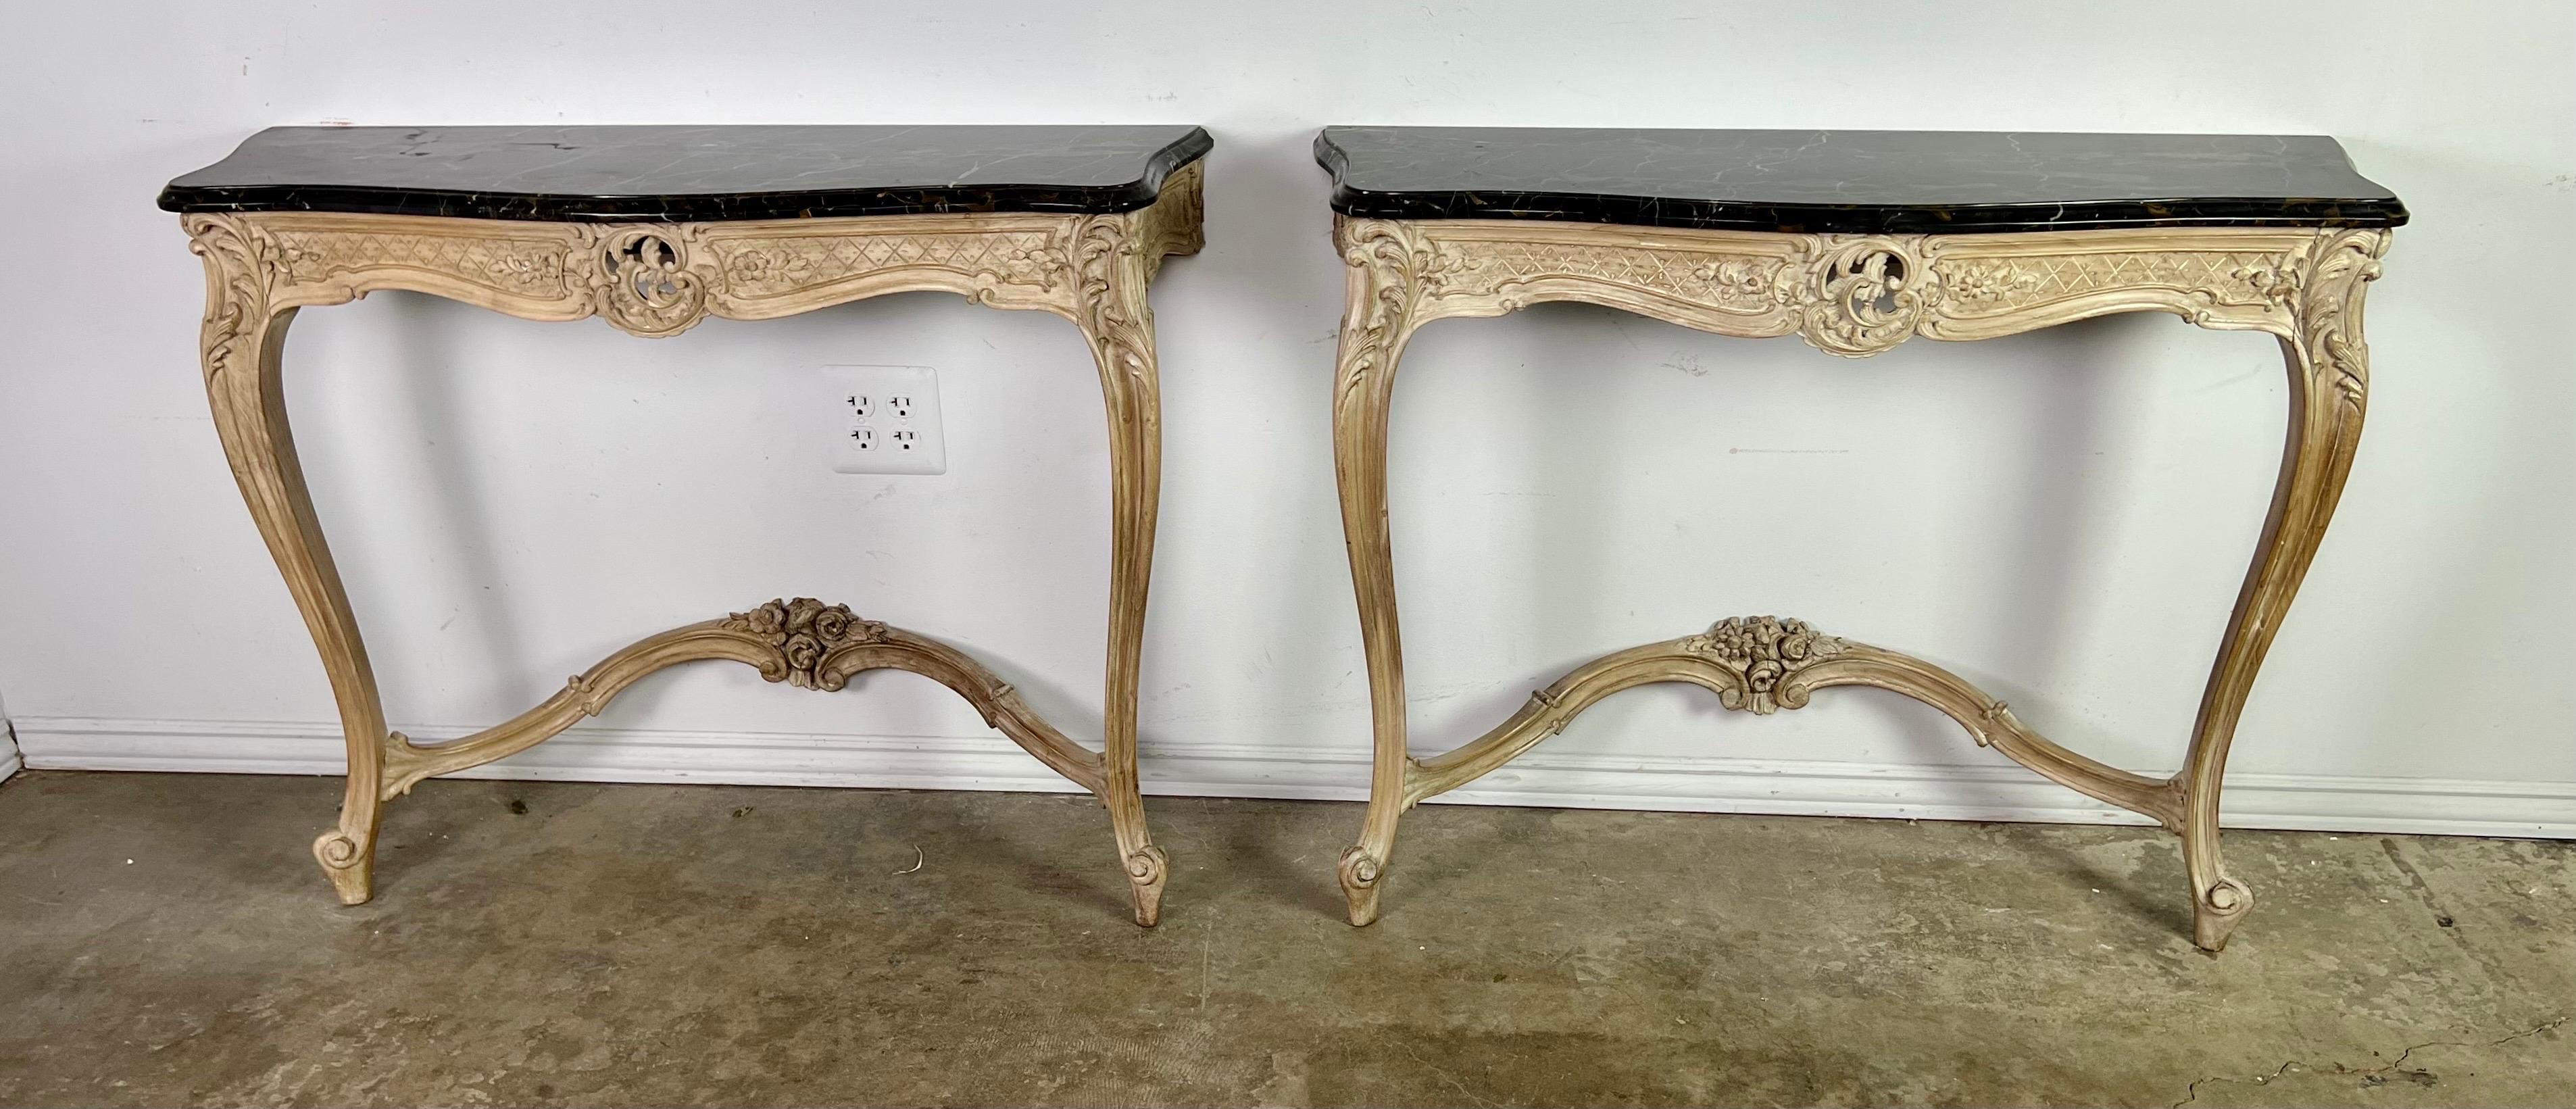 Pair of French Louis XV style carved wood consoles with original black marble tops. There is carved roses at the bases of the consoles that each stand on two cabriole legs that end in rams head feet. There is more carving at the top center of the